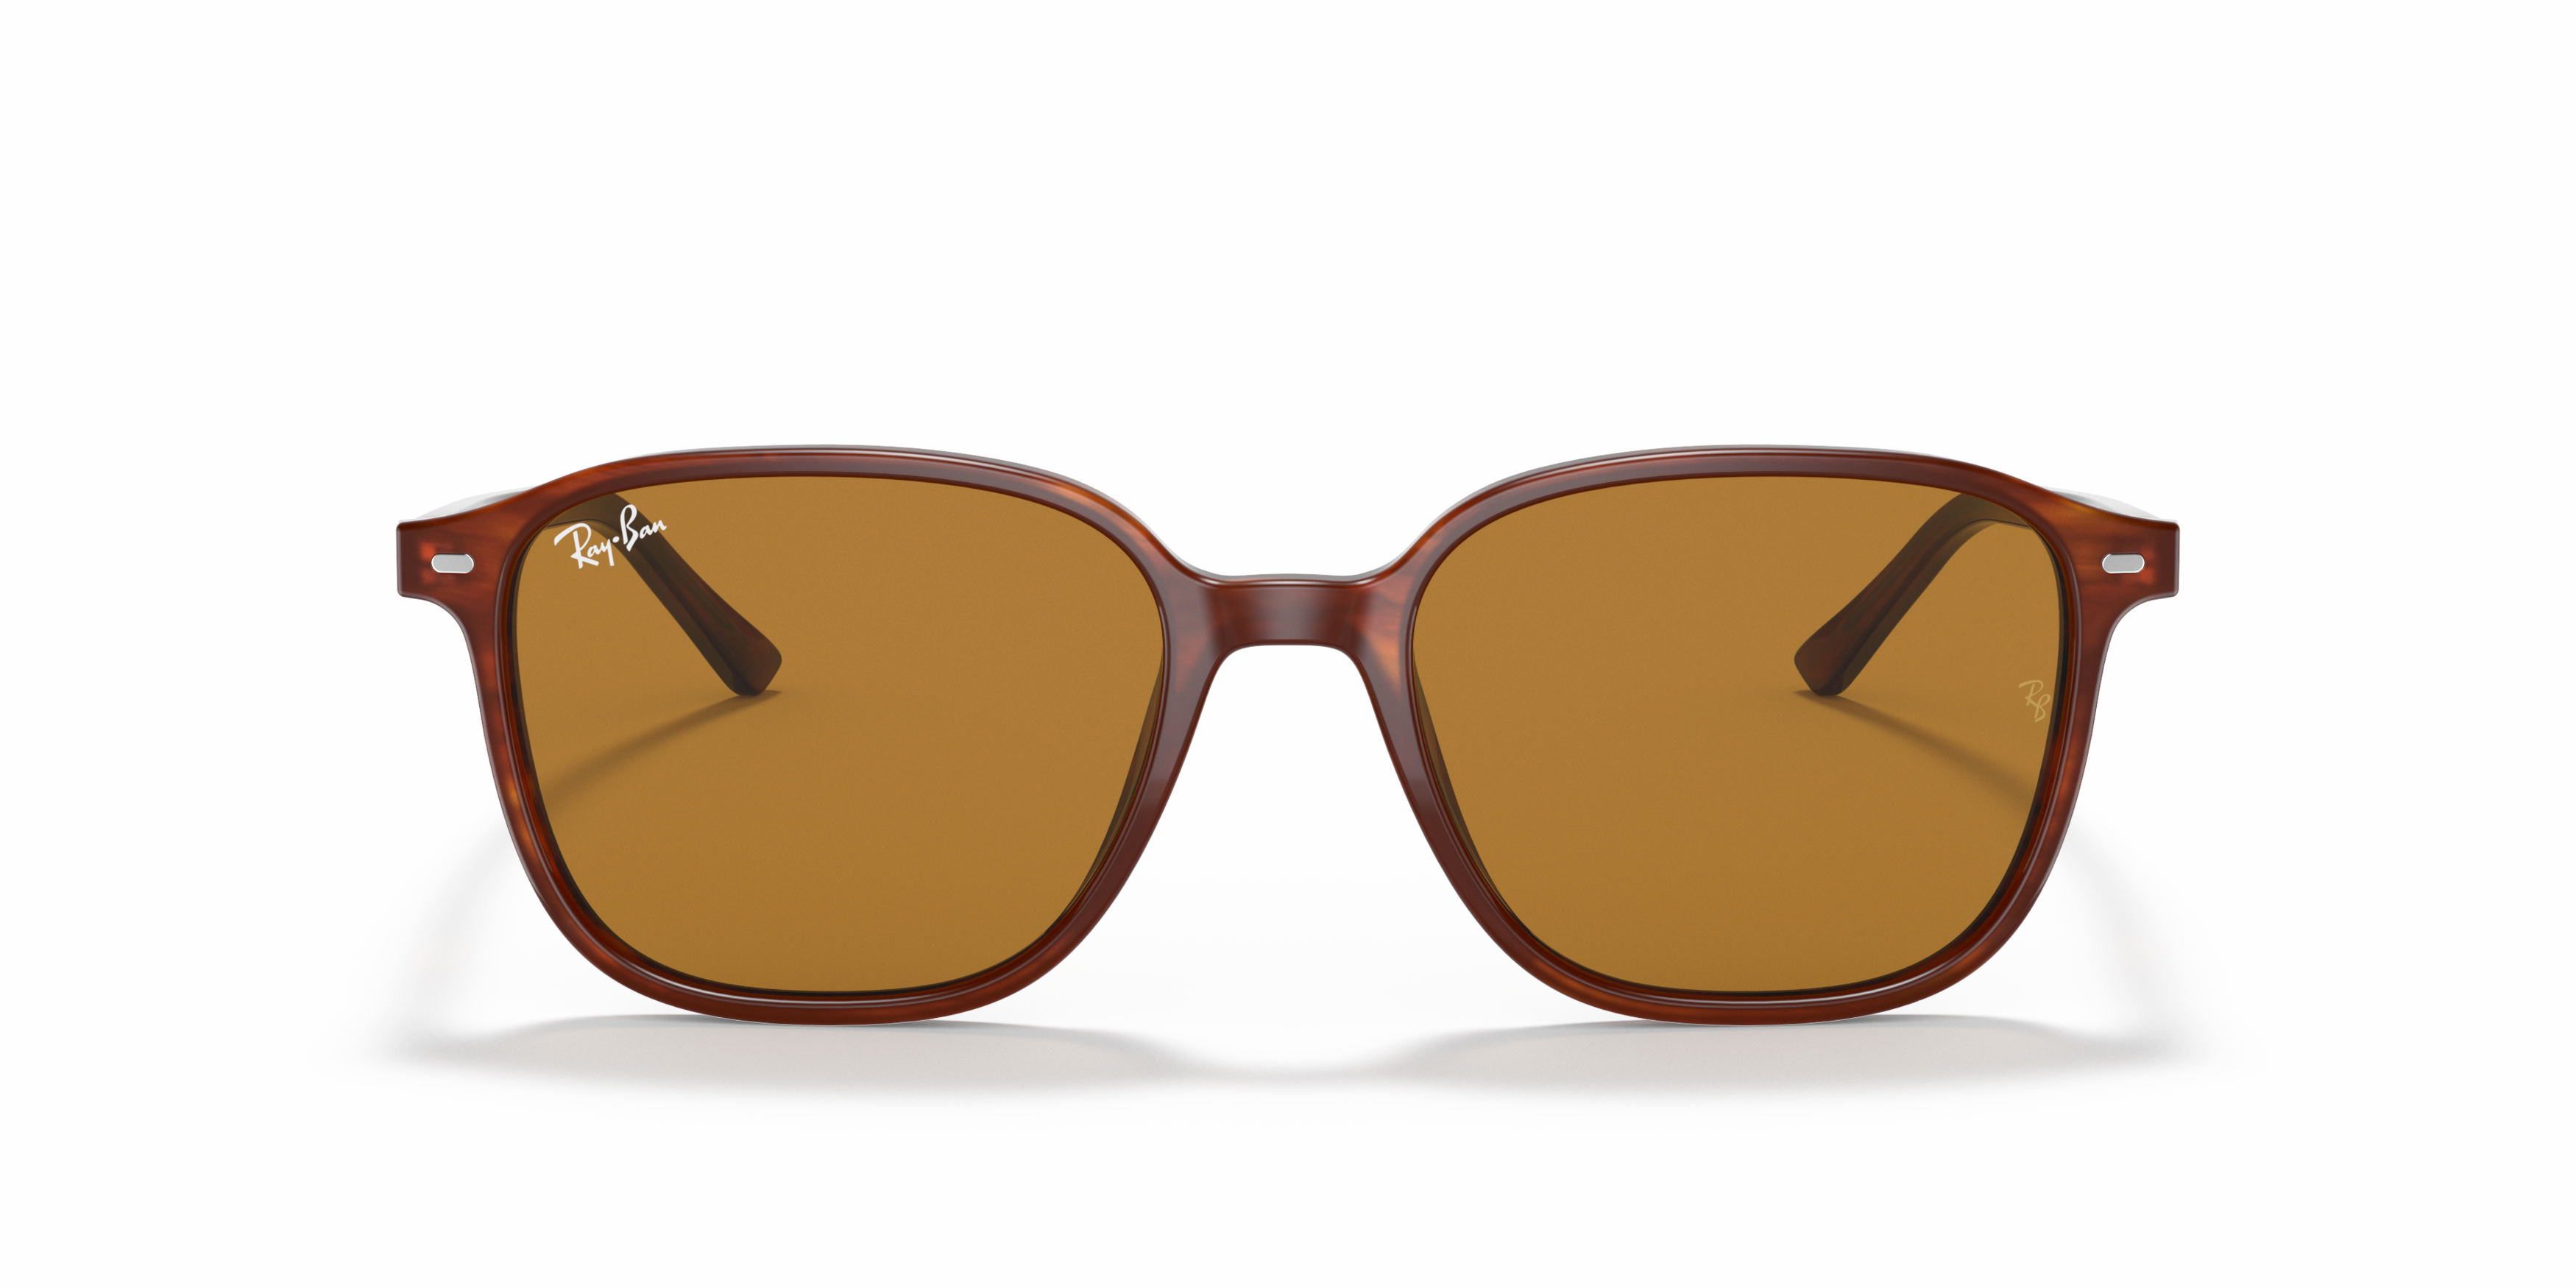 [products.image.front] Ray-Ban Leonard RB2193 954/33